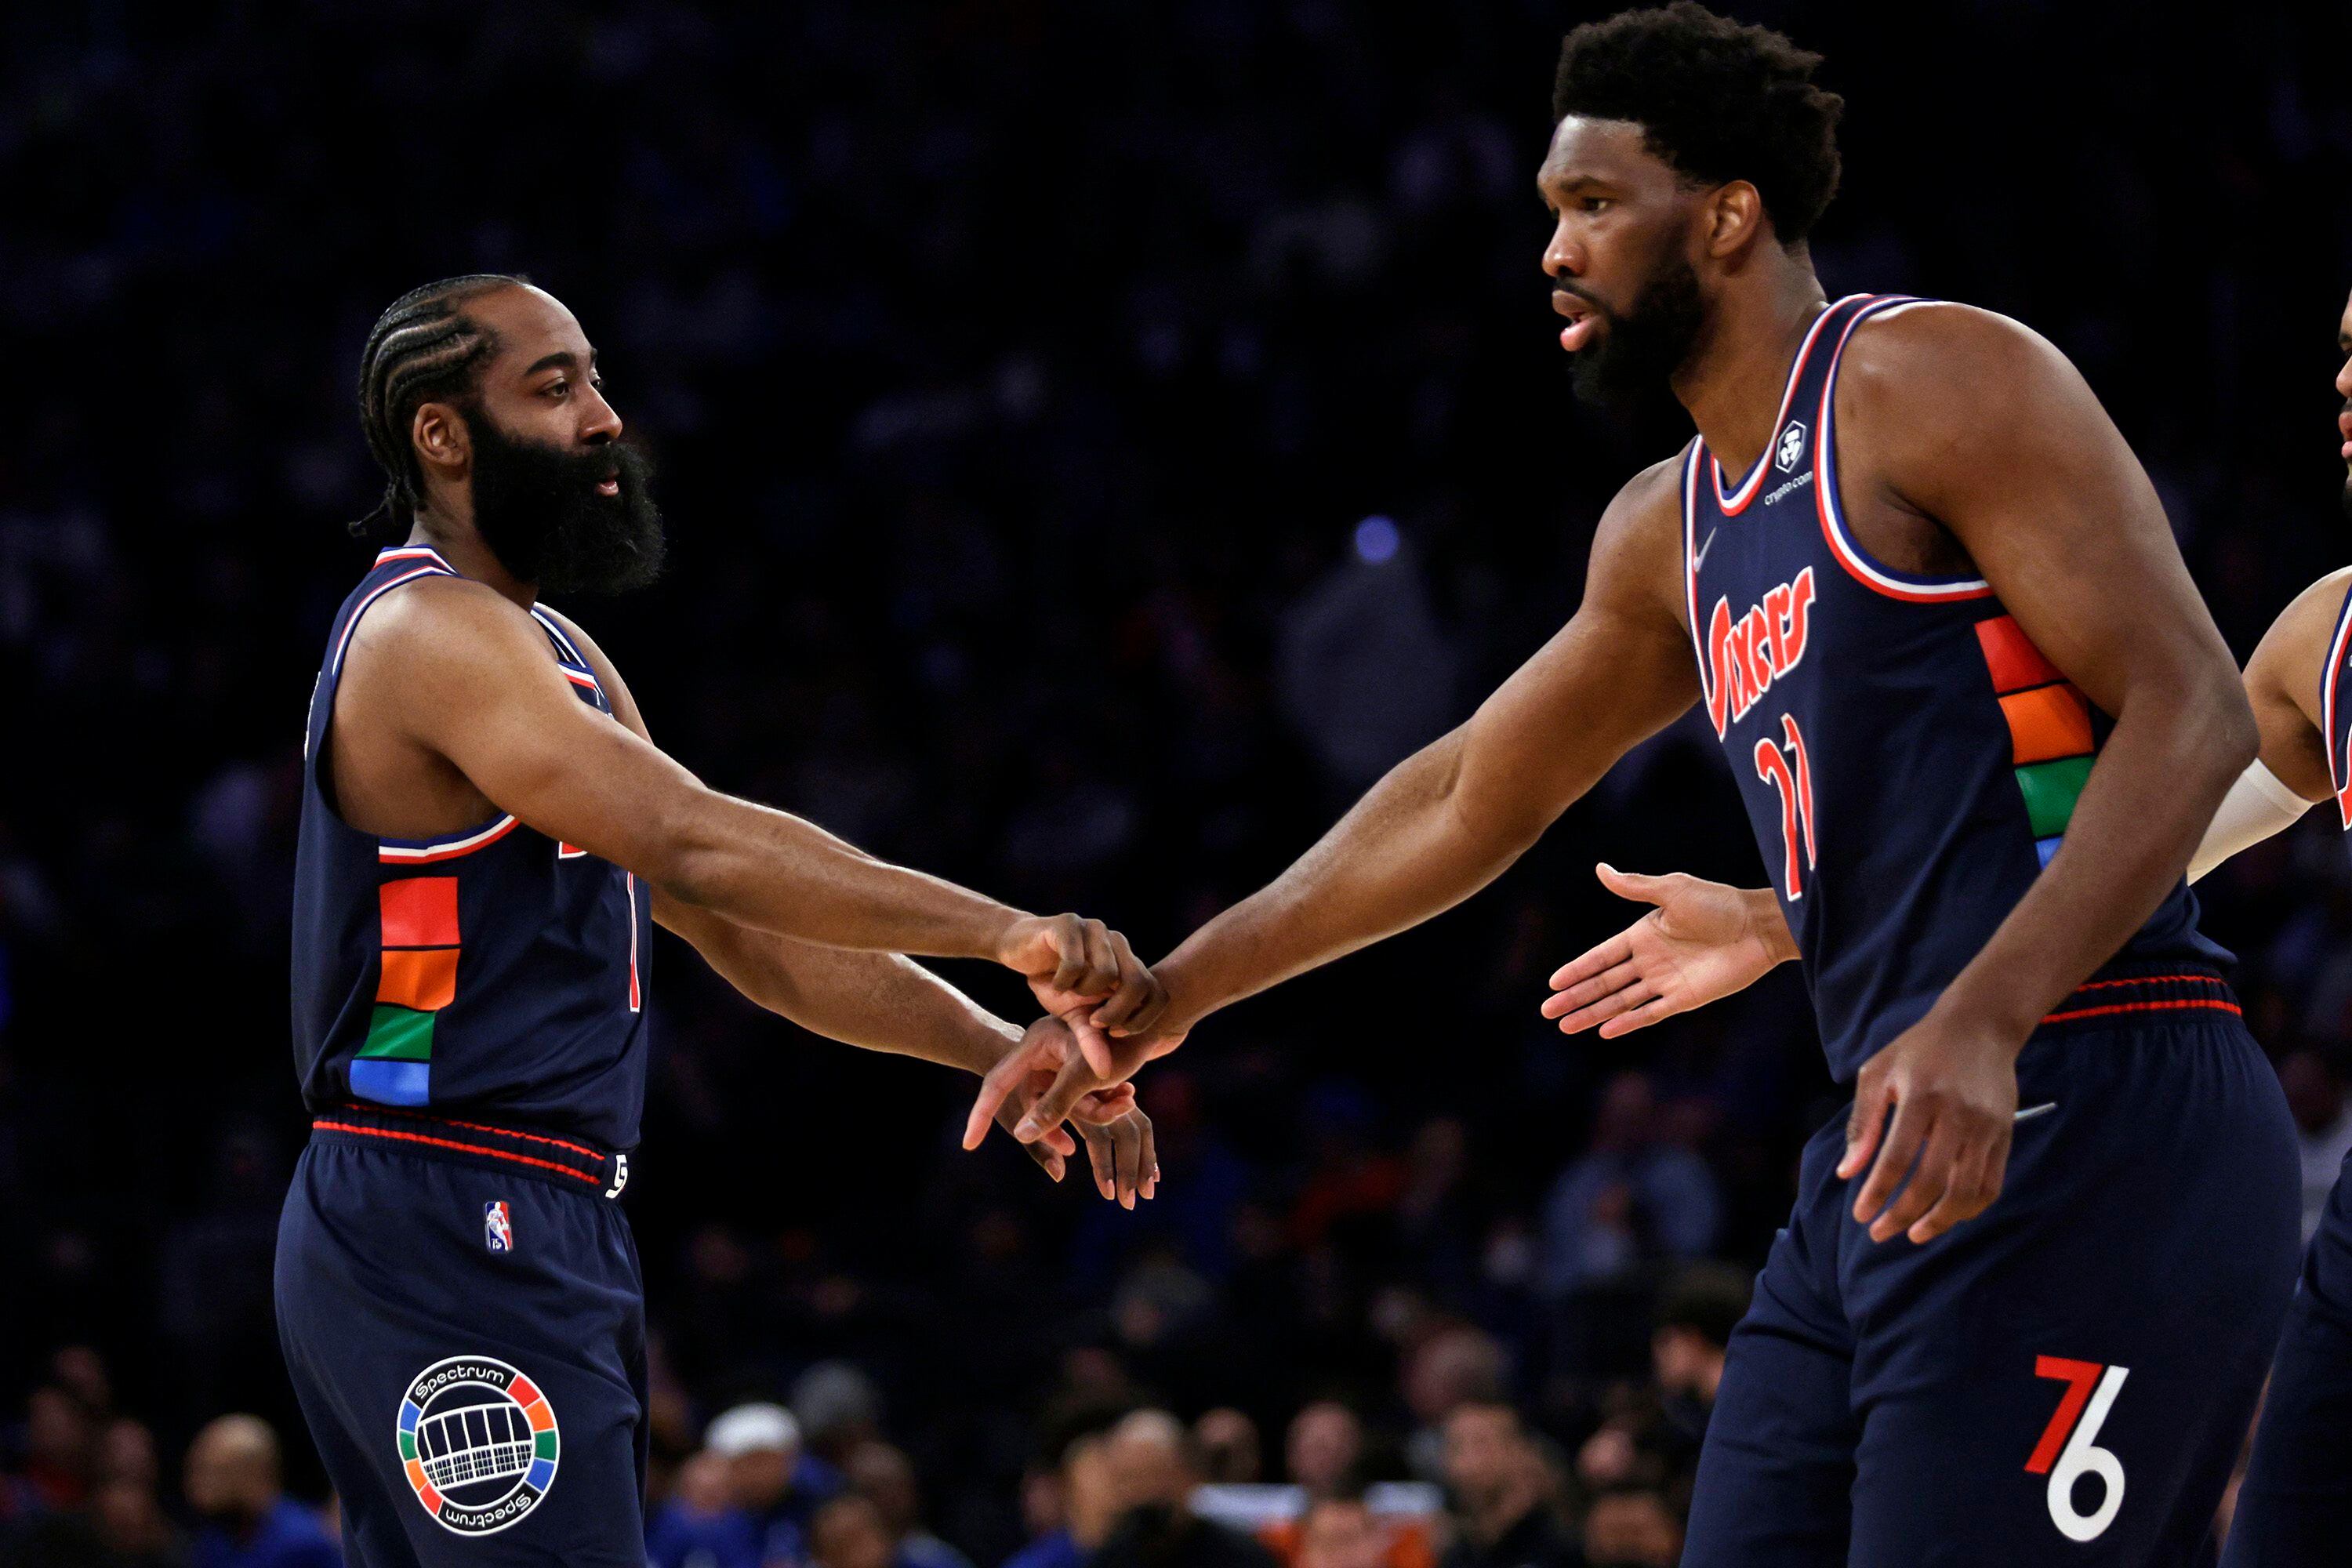 The most wide open I've ever been in my career': The James Harden-Joel  Embiid duo is all smiles after blowout debut win - ESPN